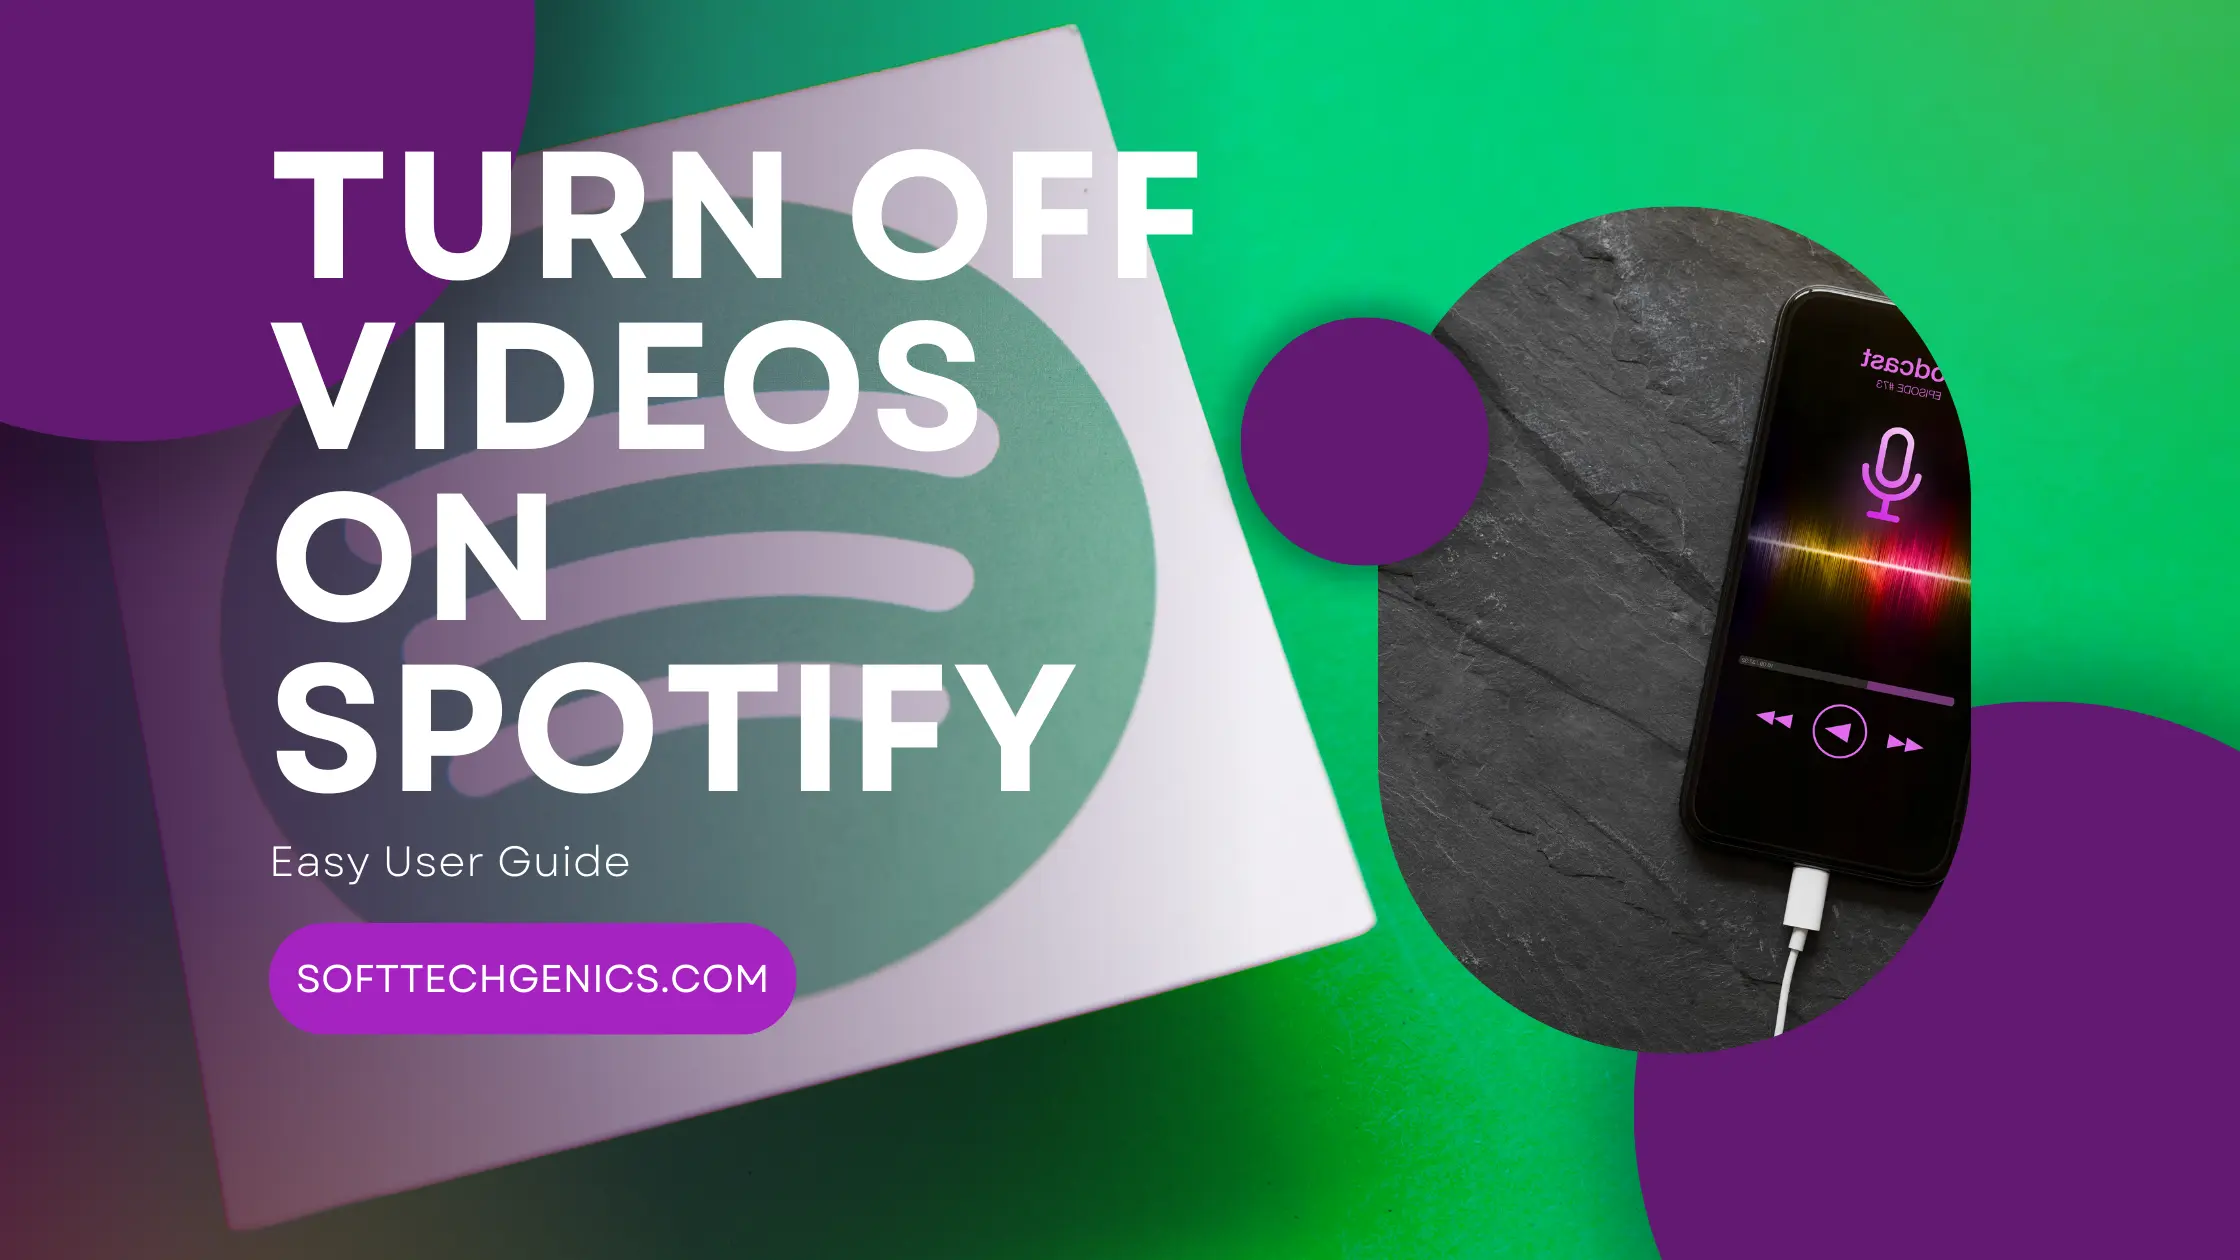 Turn Off Videos on Spotify: Easy User Guide